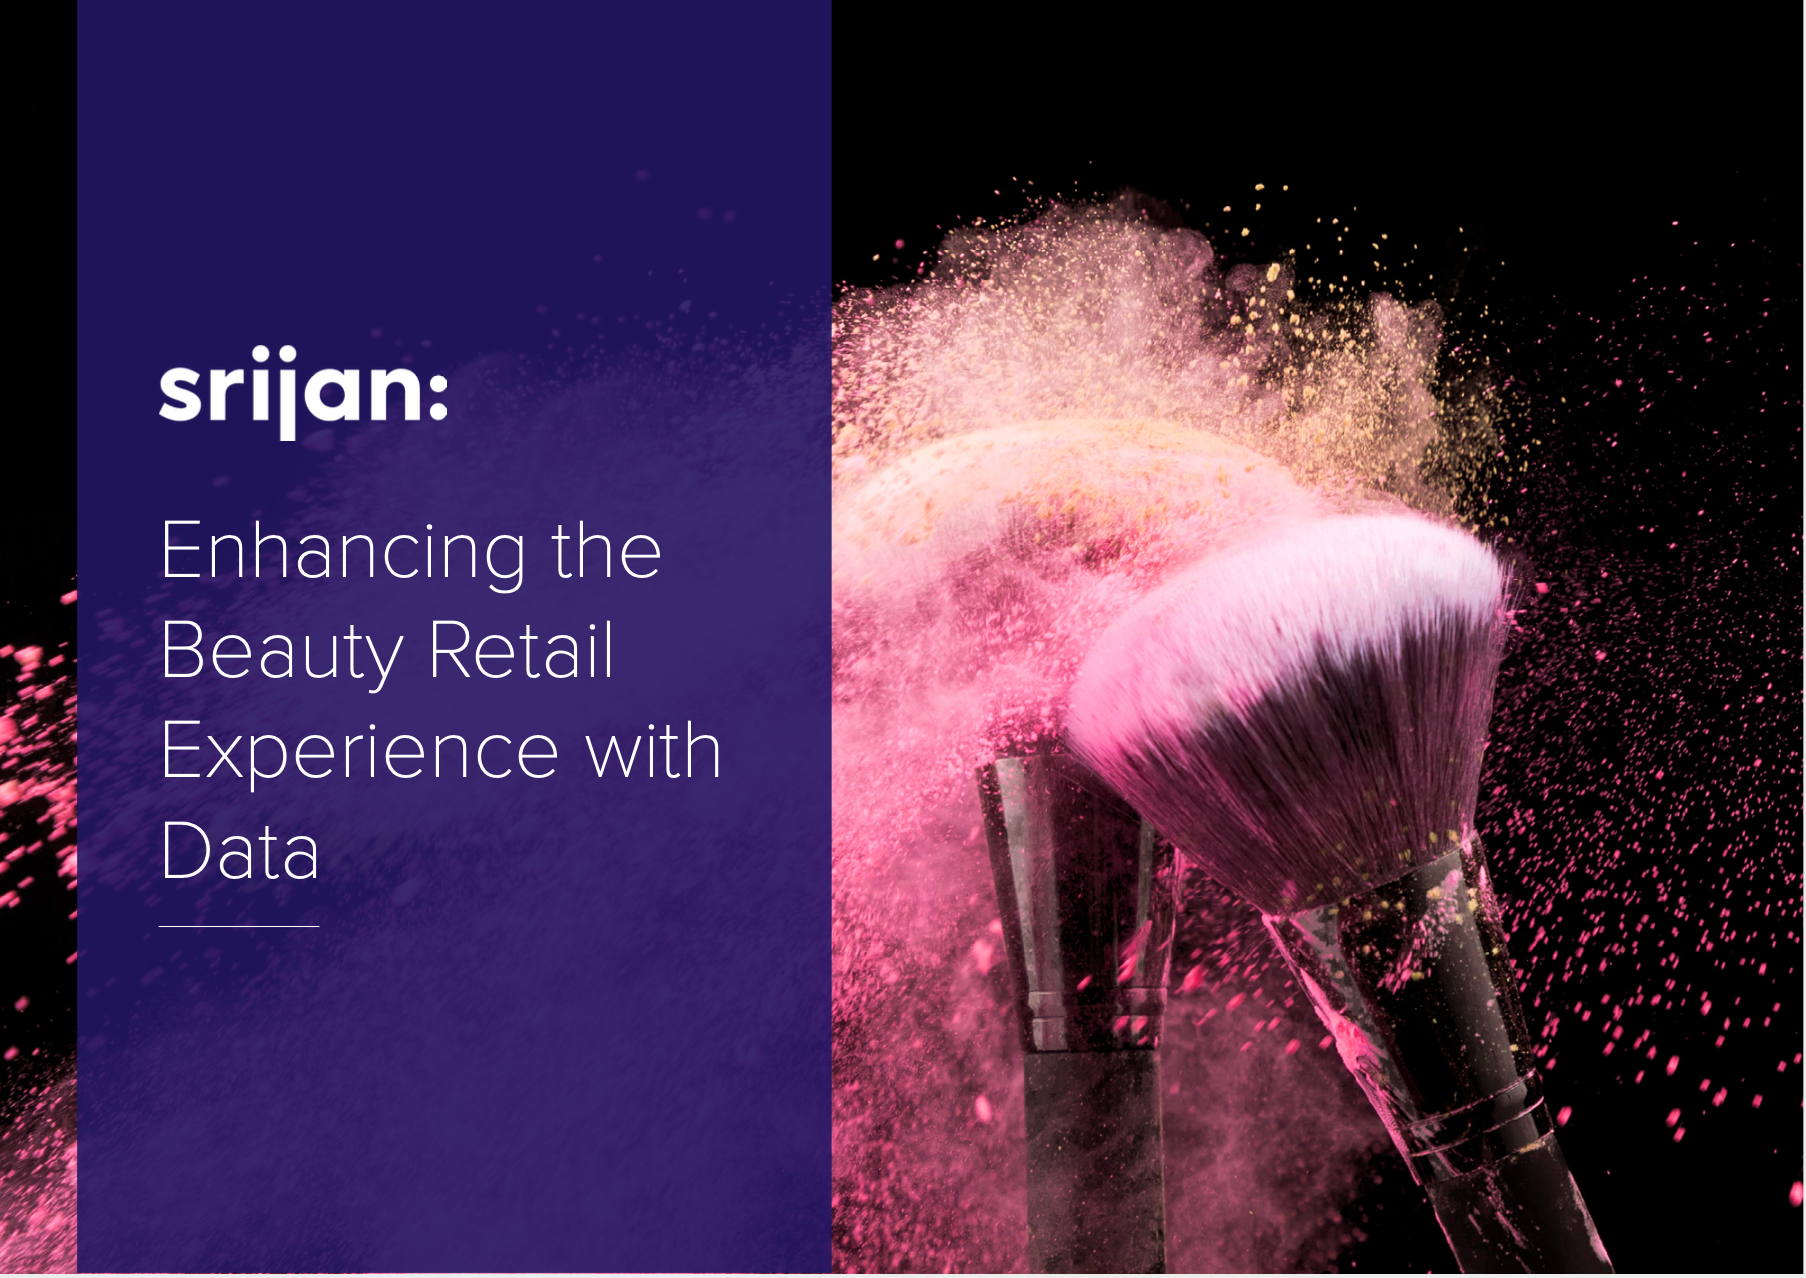 Download Ebook - Enhancing the Beauty Retail Experience with Data